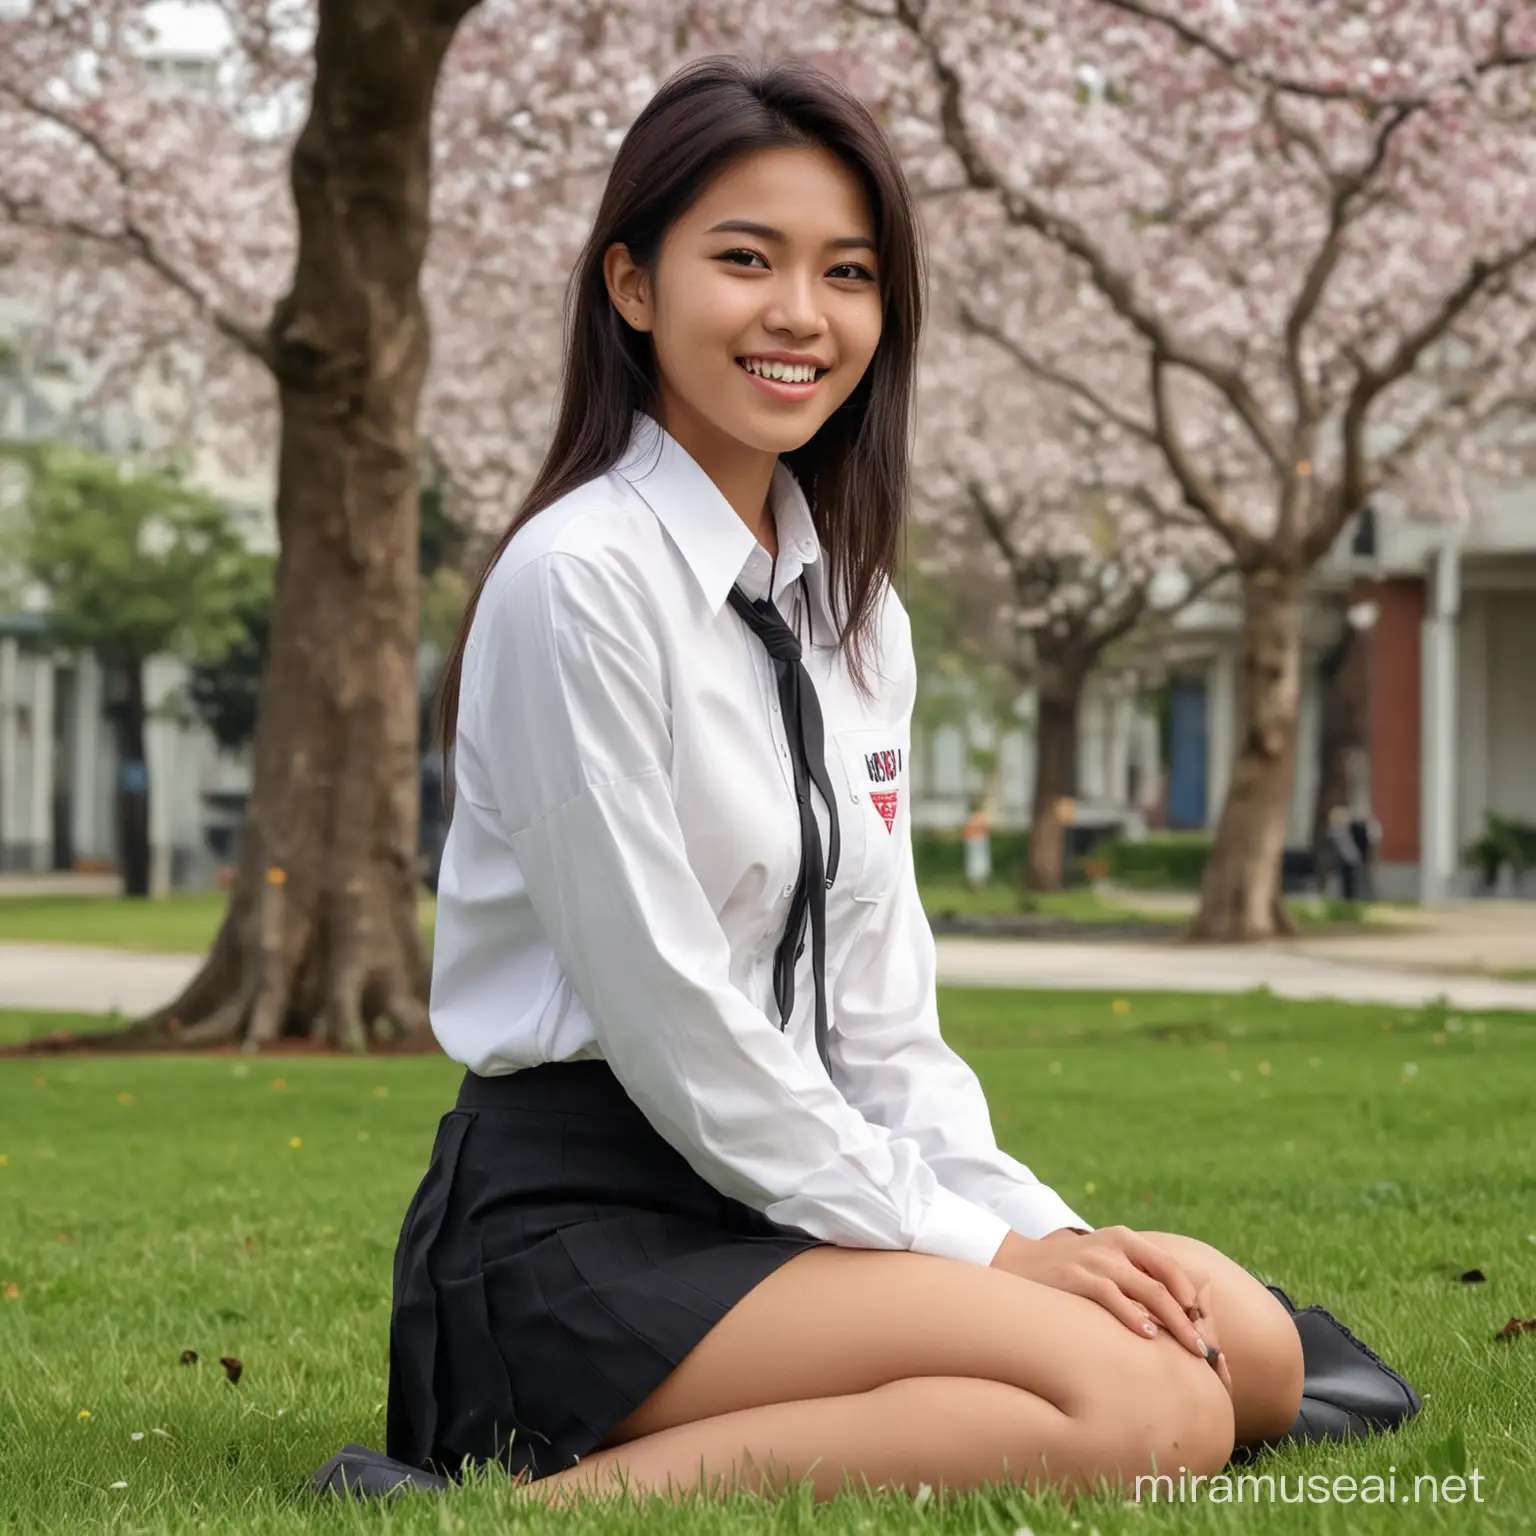 Javanese indonesian girl, 19 years old, beautiful and sexy, attractive lips, damaged clothes, tall figure, bright sweet smile with exposed teeth, huge breasts, sitting on the lawn, sideways, ((wearing indonesian srnior high school uniform, white shirt uniform, grey skirt, black loafers, open shirt)), (perfect body)), ((cherry blossom park)), most unique details, sharp face (details: 1.2) realism, perfect lighting, xyzabcsweater23, veronika_body, (six pack: 1.3), full body